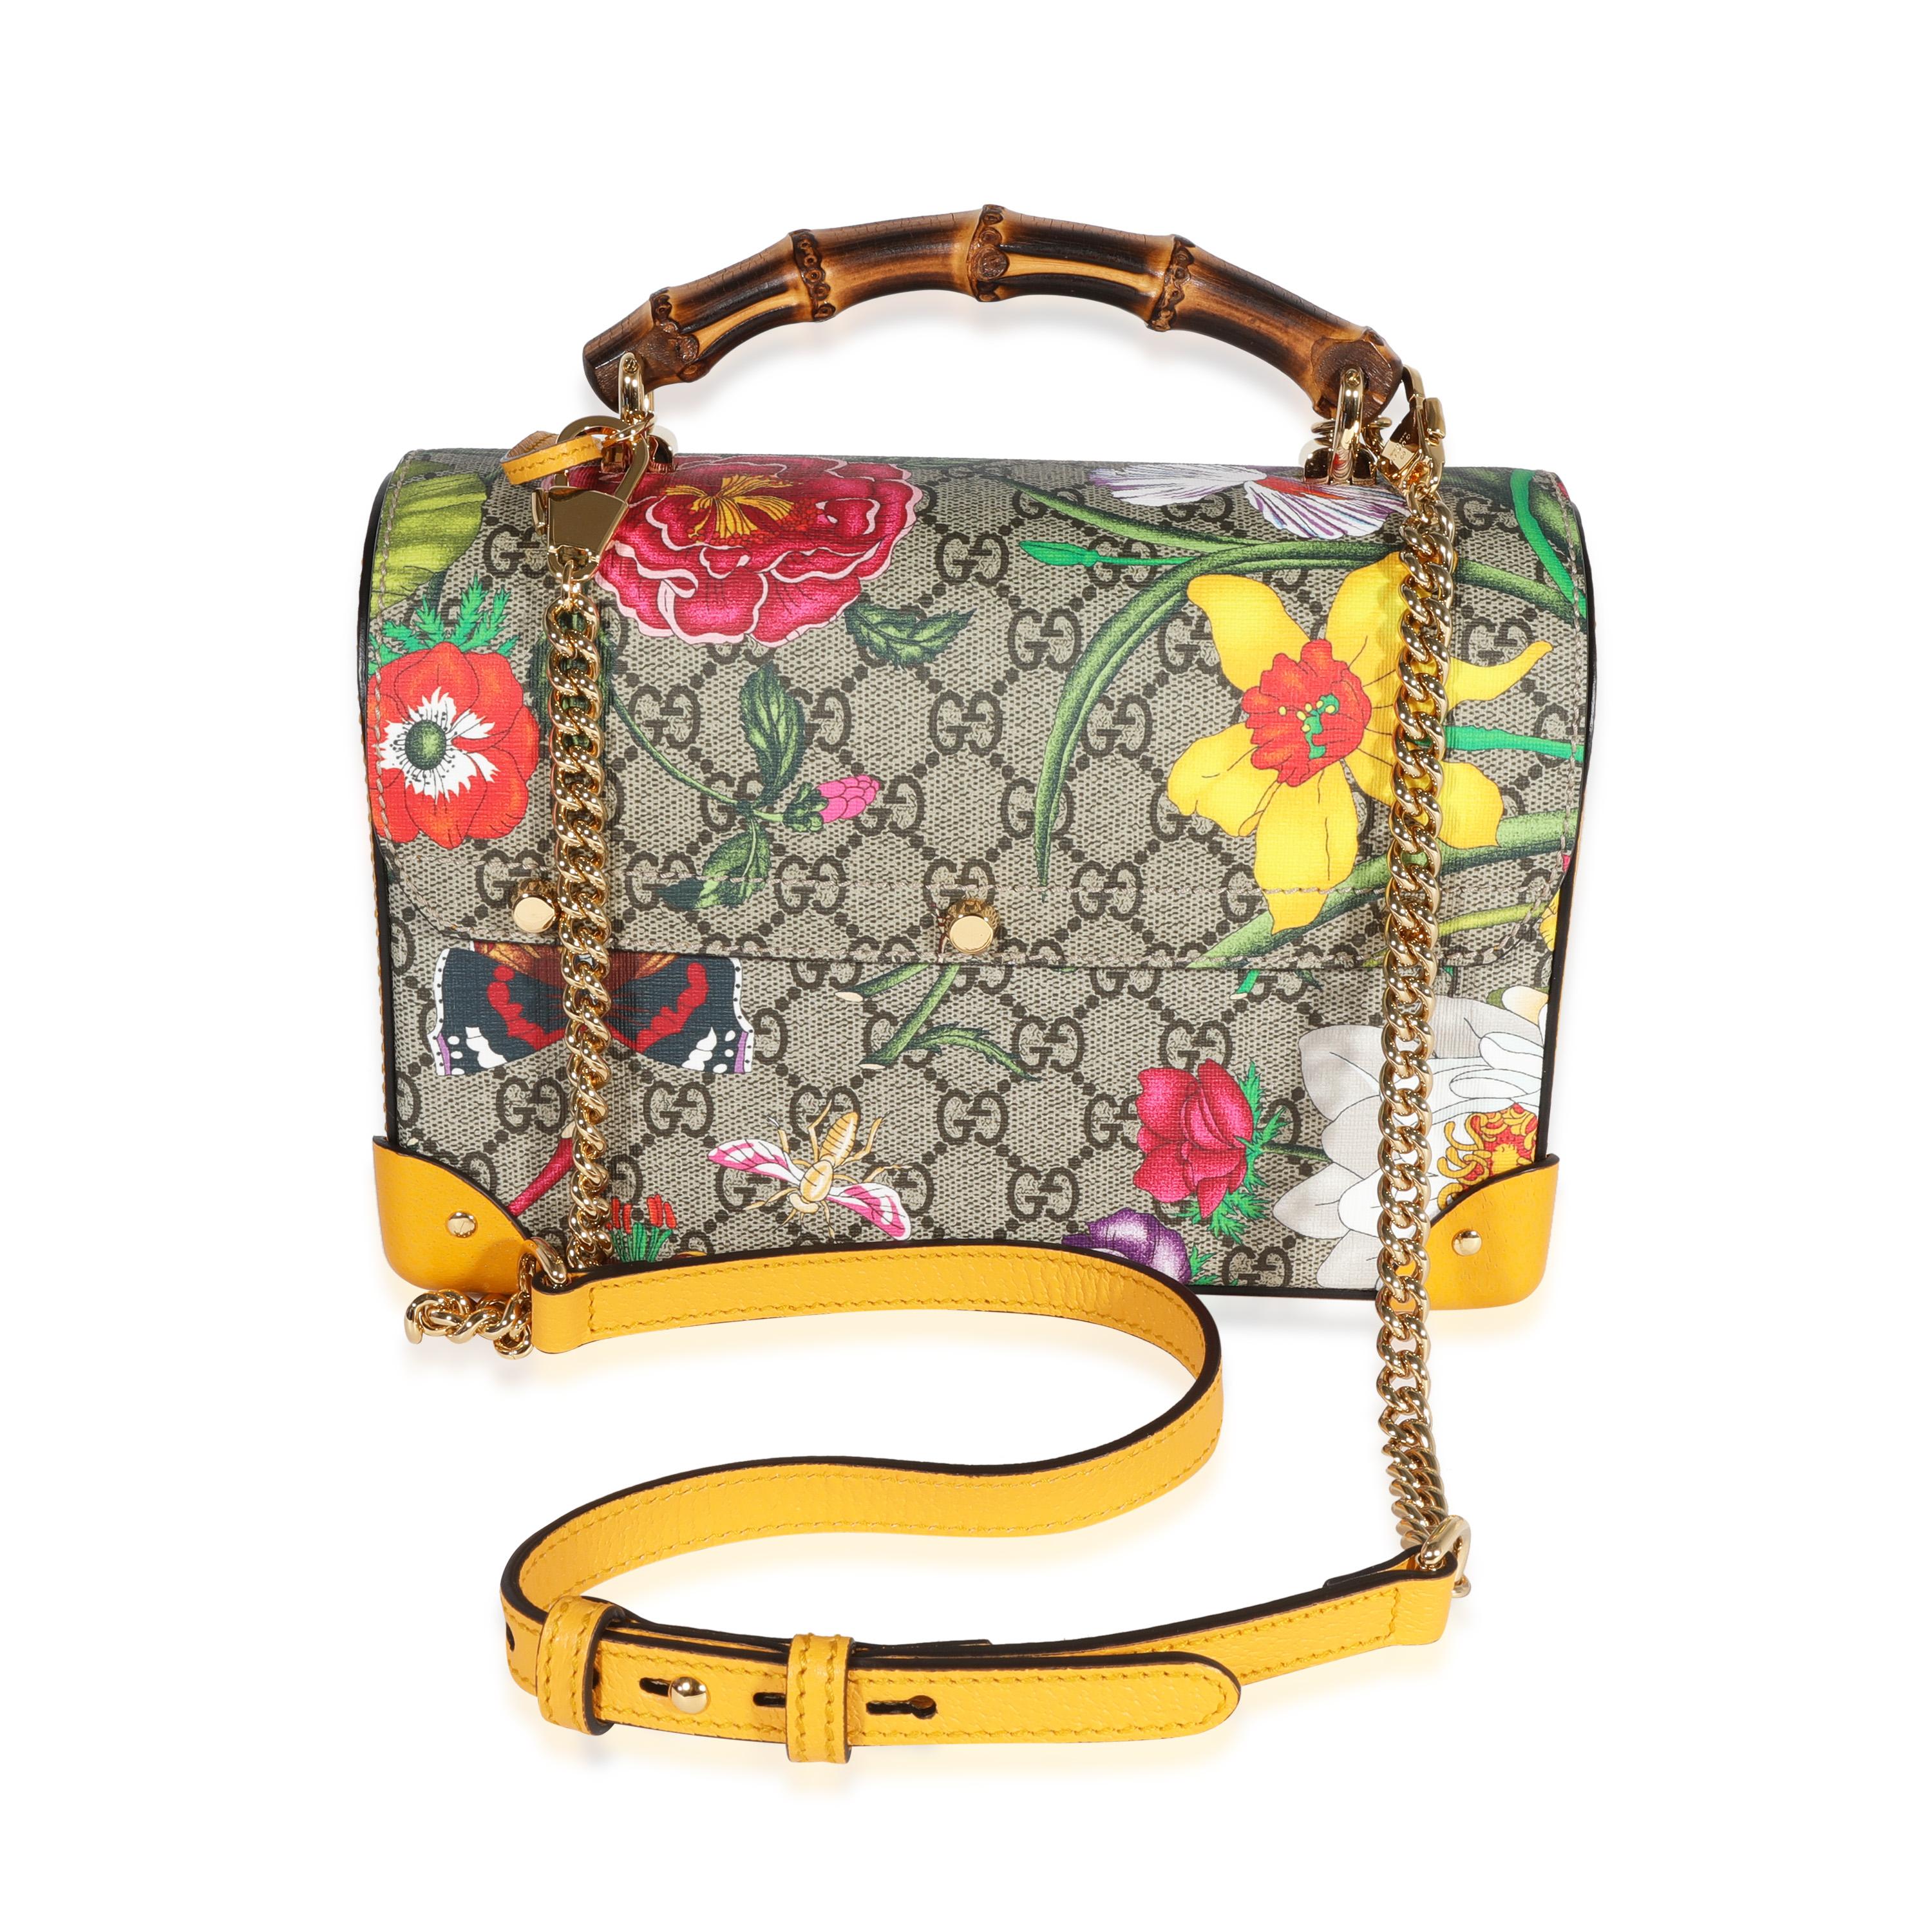 Listing Title: Gucci GG Supreme Flora Small Padlock Bamboo Bag
SKU: 122086
MSRP: 2630.00
Condition: Pre-owned 
Handbag Condition: Excellent
Condition Comments: Excellent Condition. Faint marks at corners. Minor scratching at hardware. No other